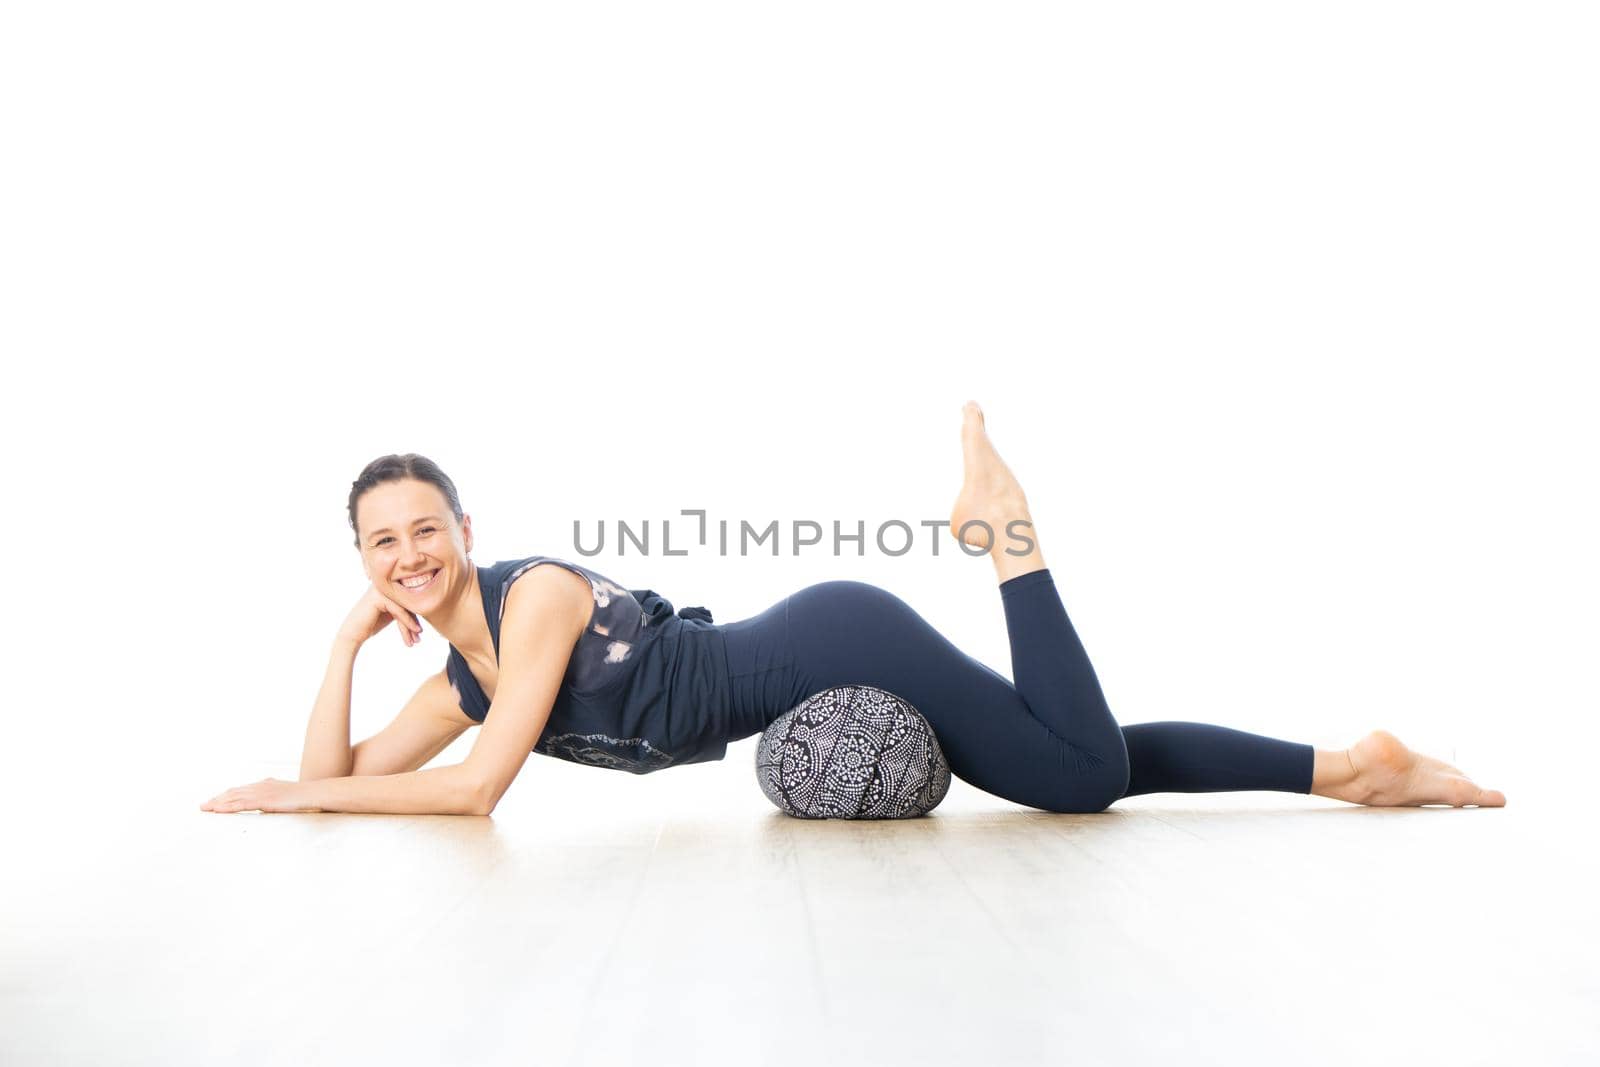 Restorative yoga with a bolster. Young sporty female yoga instructor in bright white yoga studio, lying on bolster cushion, stretching, smilling, showing love and passion for restorative yoga.